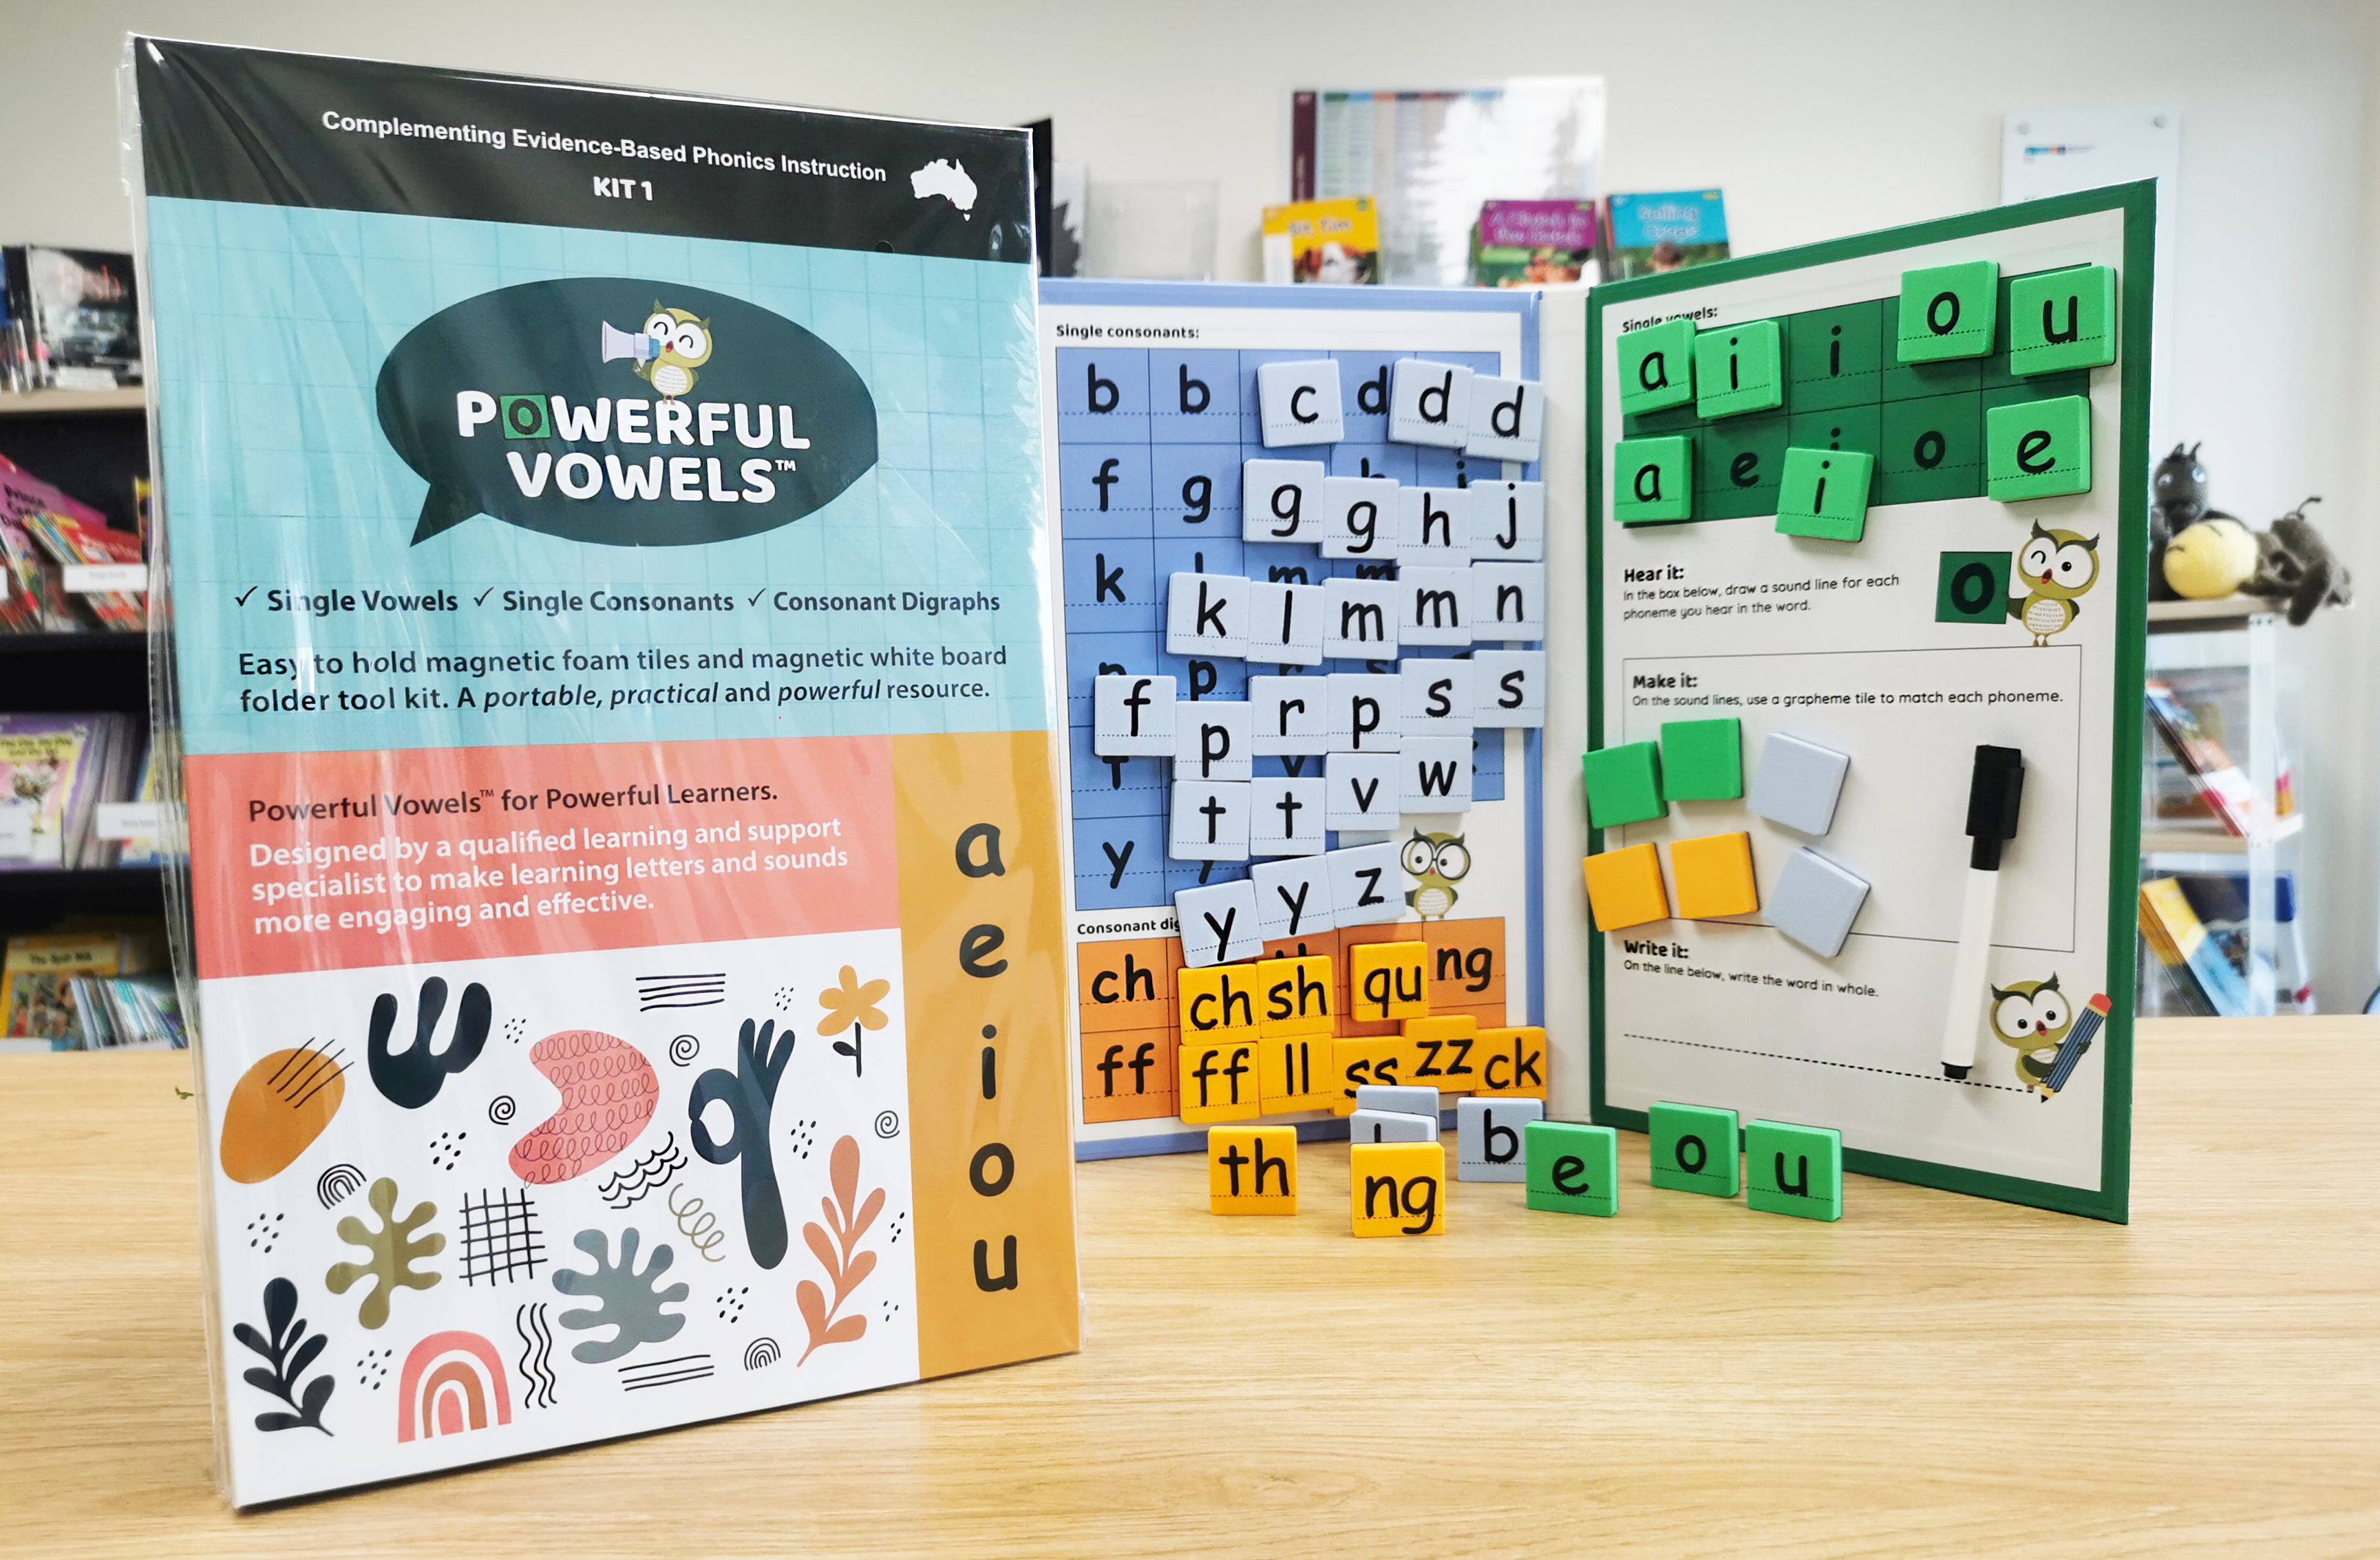 Powerful Vowels - Kit 1 - Initial Code